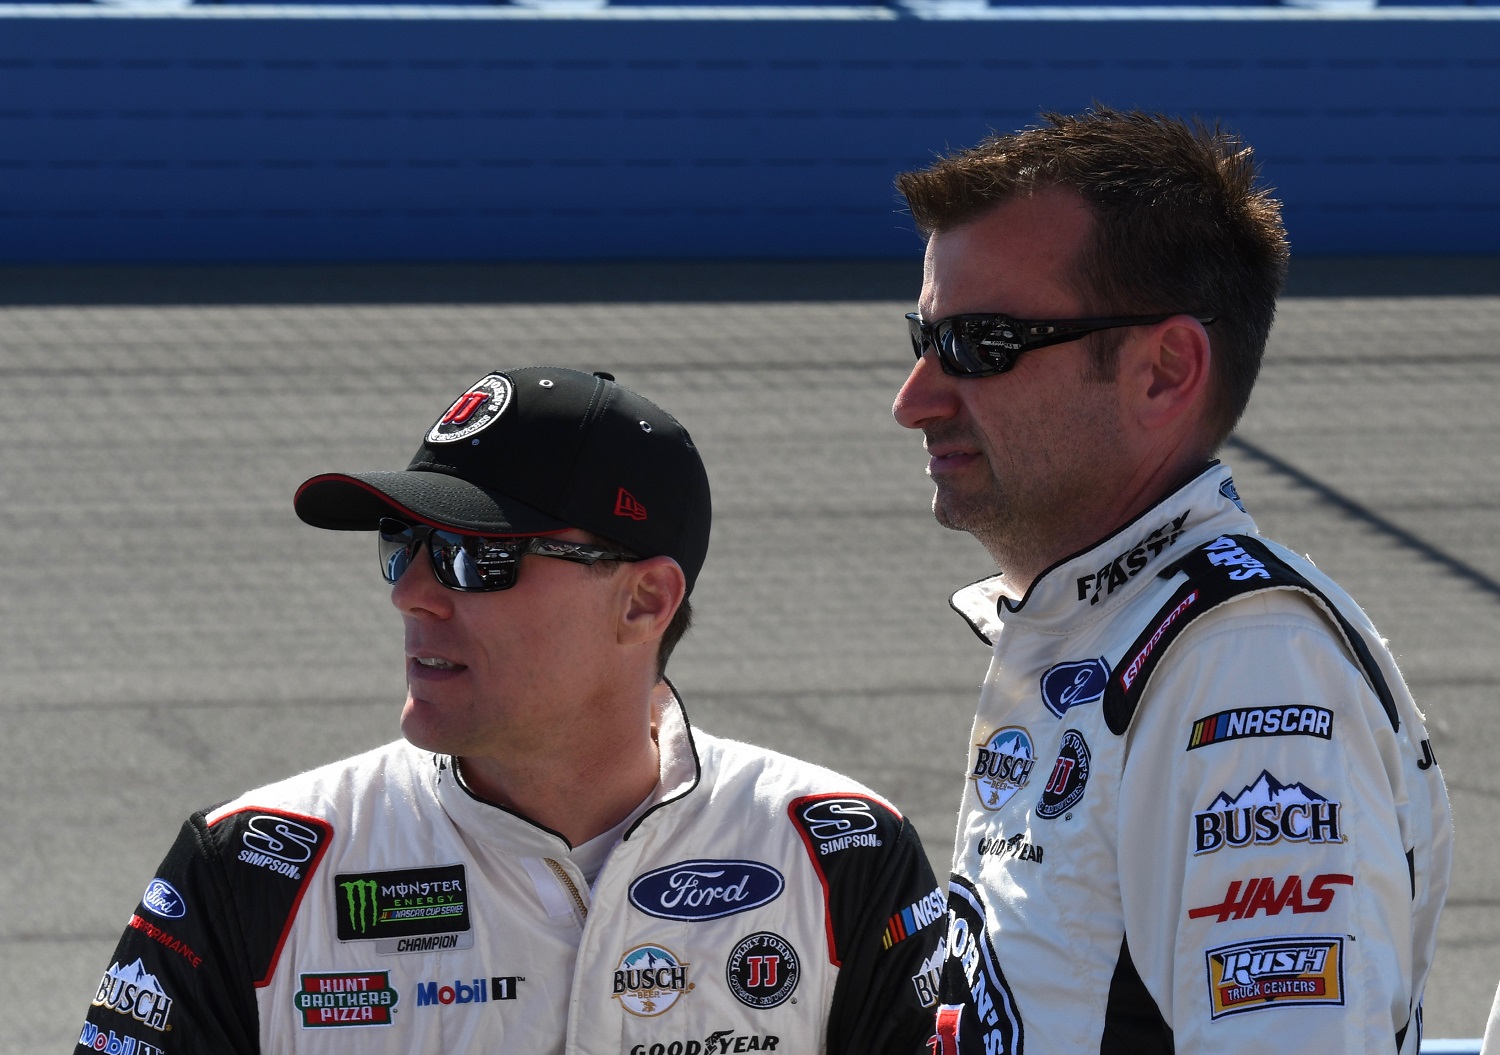 Kevin Harvick and crew chief Rodney Childers on pit lane prior to the Auto Club 400 on March 17, 2019.